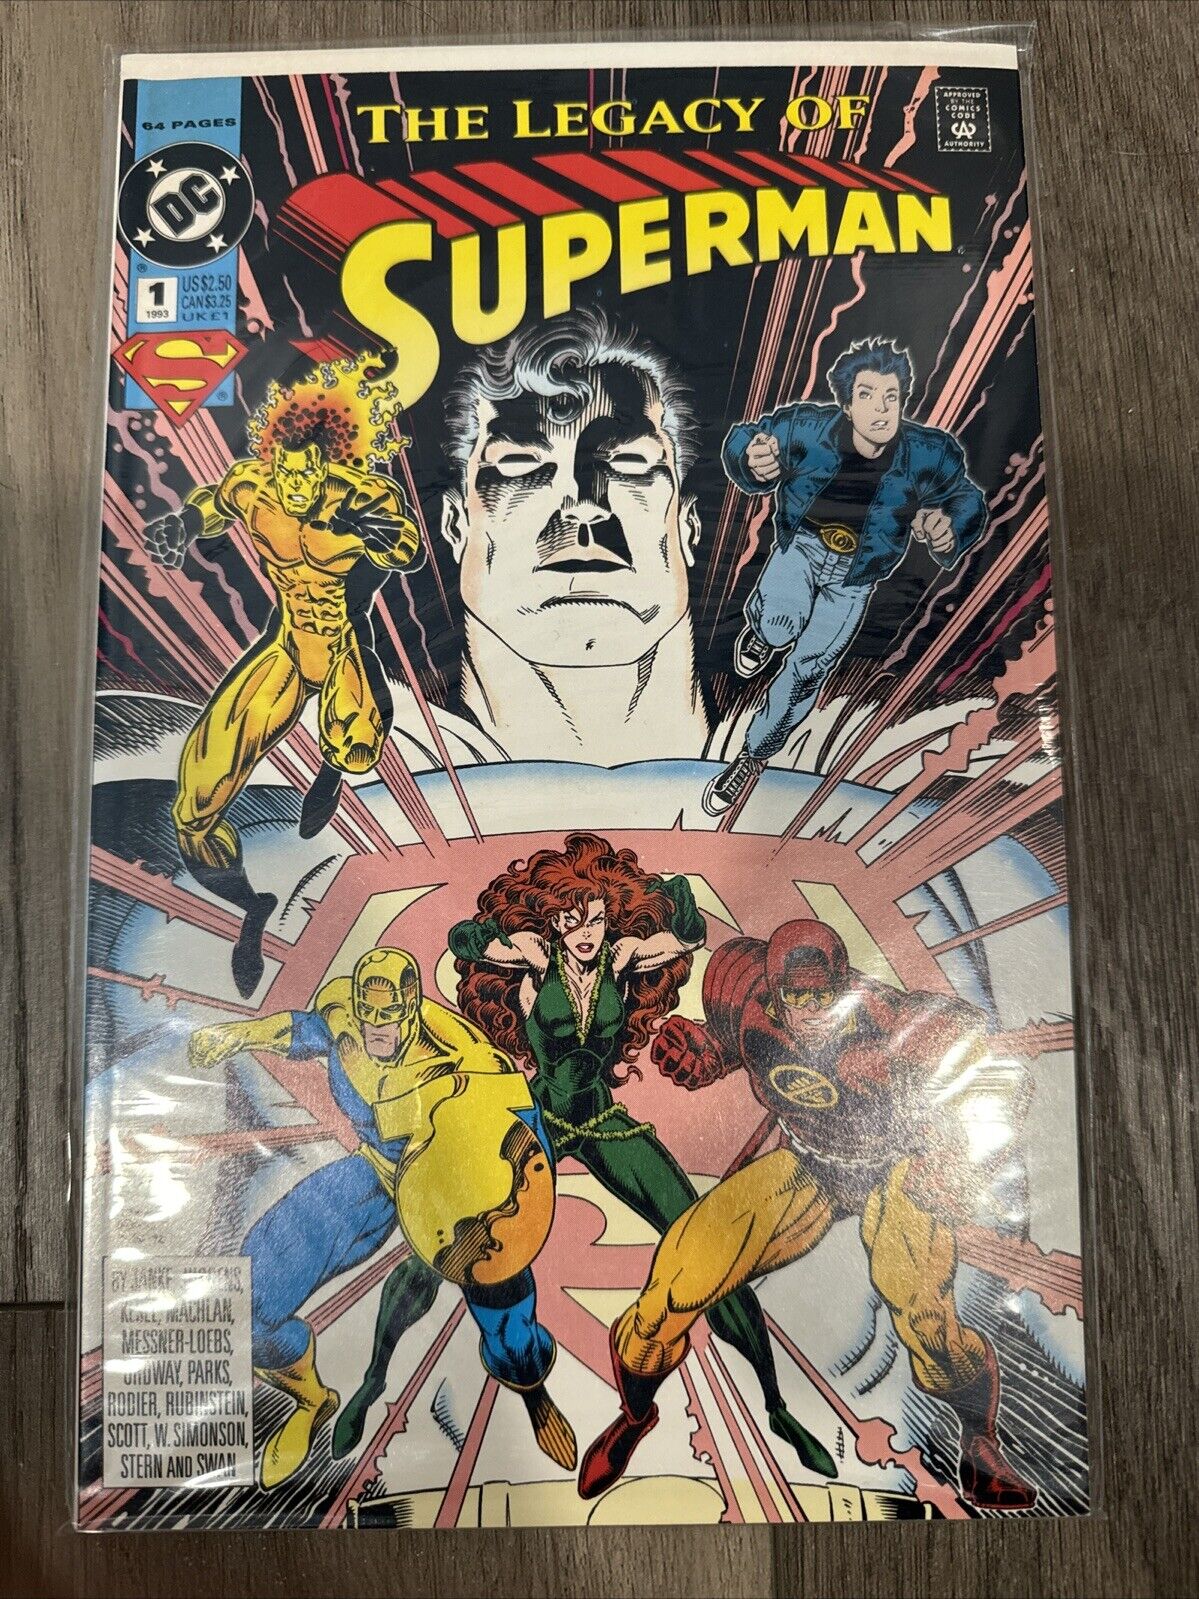 DC COMICS - SUPERMAN: THE LEGACY OF SUPERMAN - #1 - MAR 1993 - FIRST ISSUE